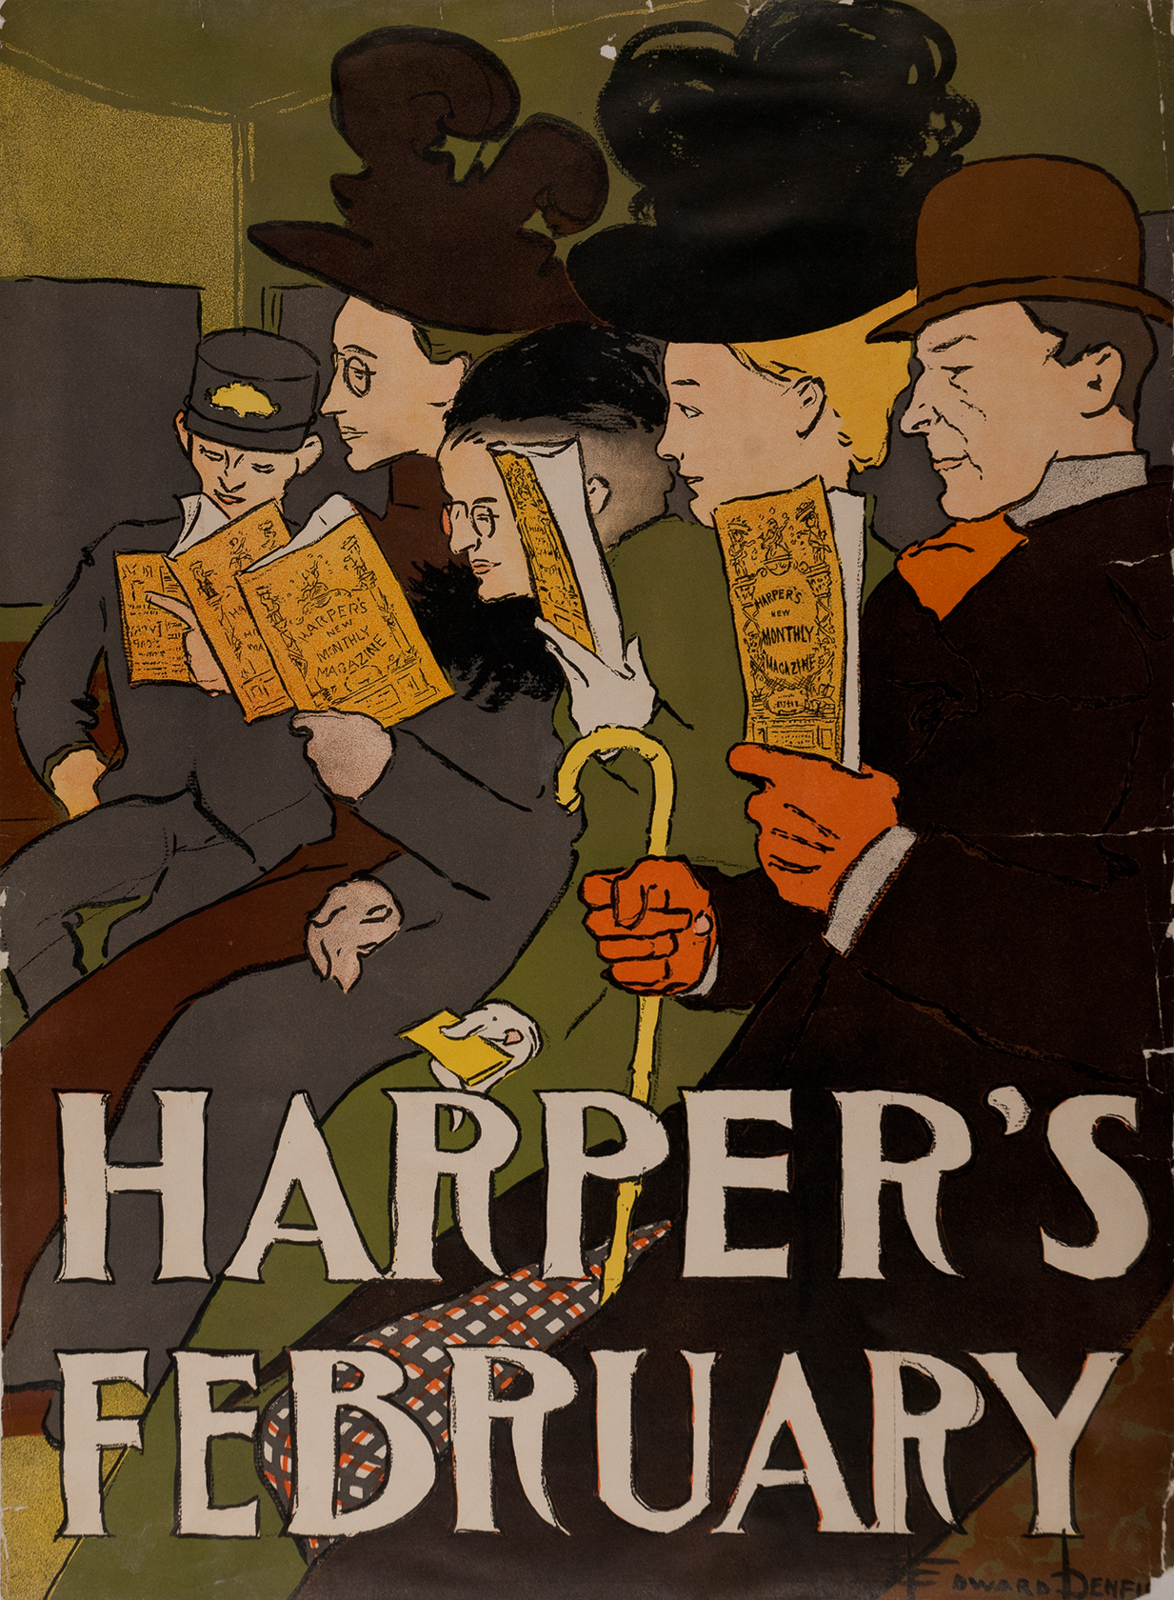 Edward Penfield, Harper’s February, 1897, color lithograph, 18 1/2 x 13 7/16 inches. Palmer Museum of Art, Gift of Jack R. Bershad, 95.107.